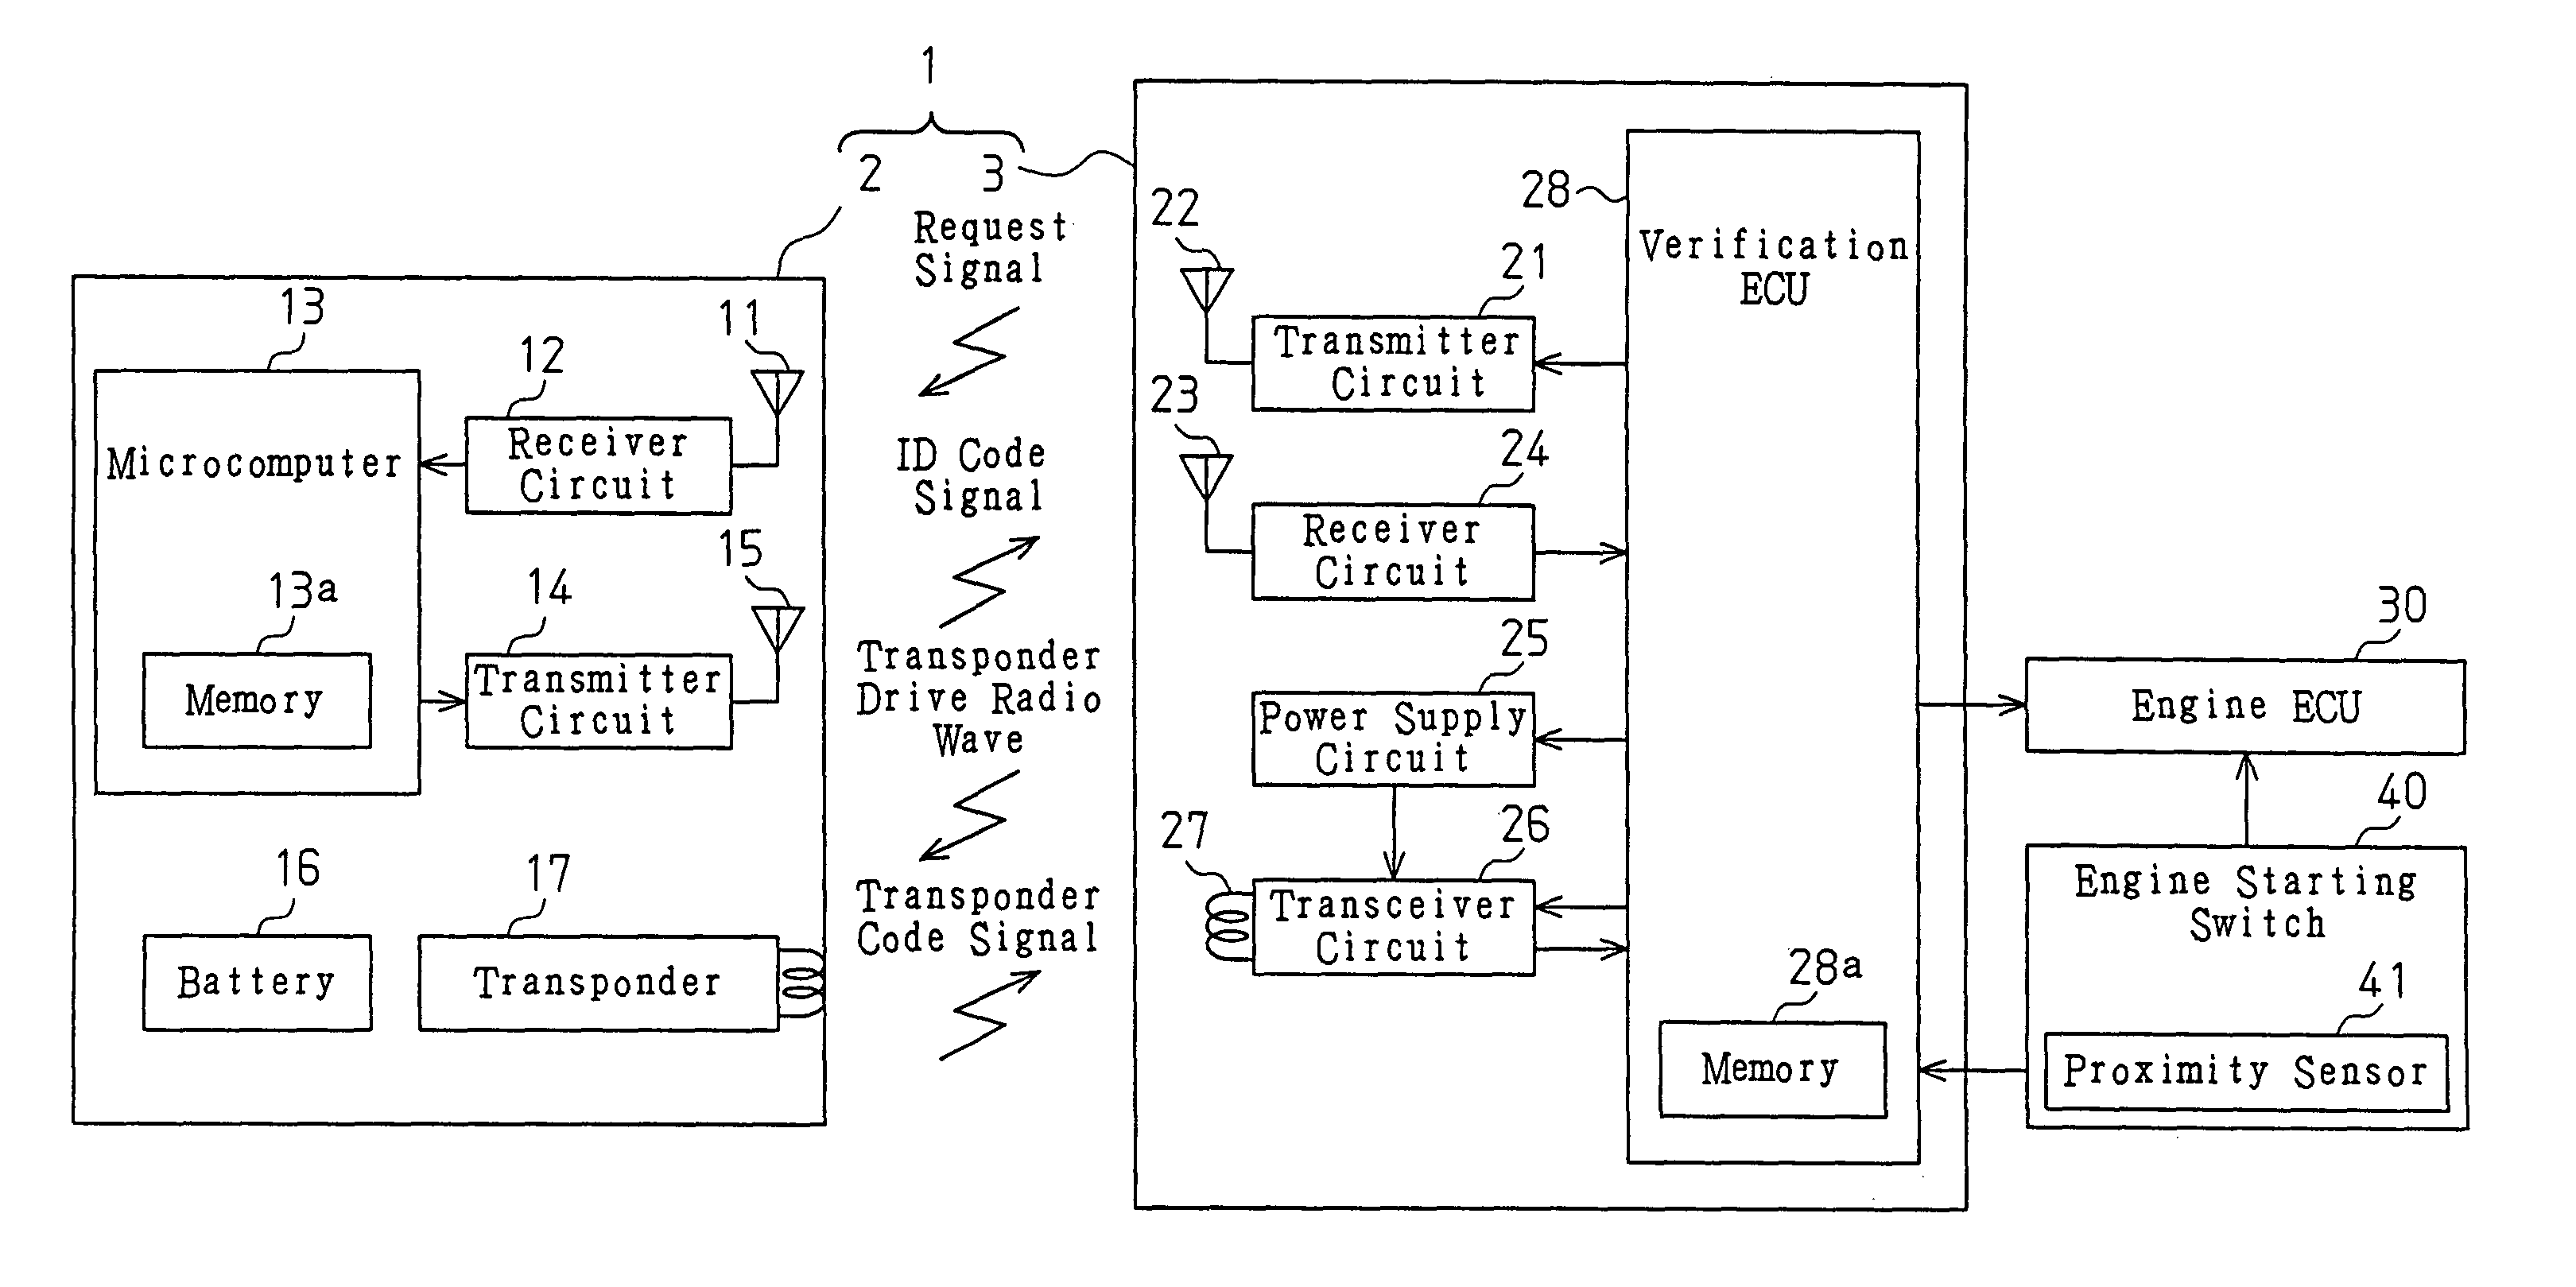 Engine starting switch and portable device